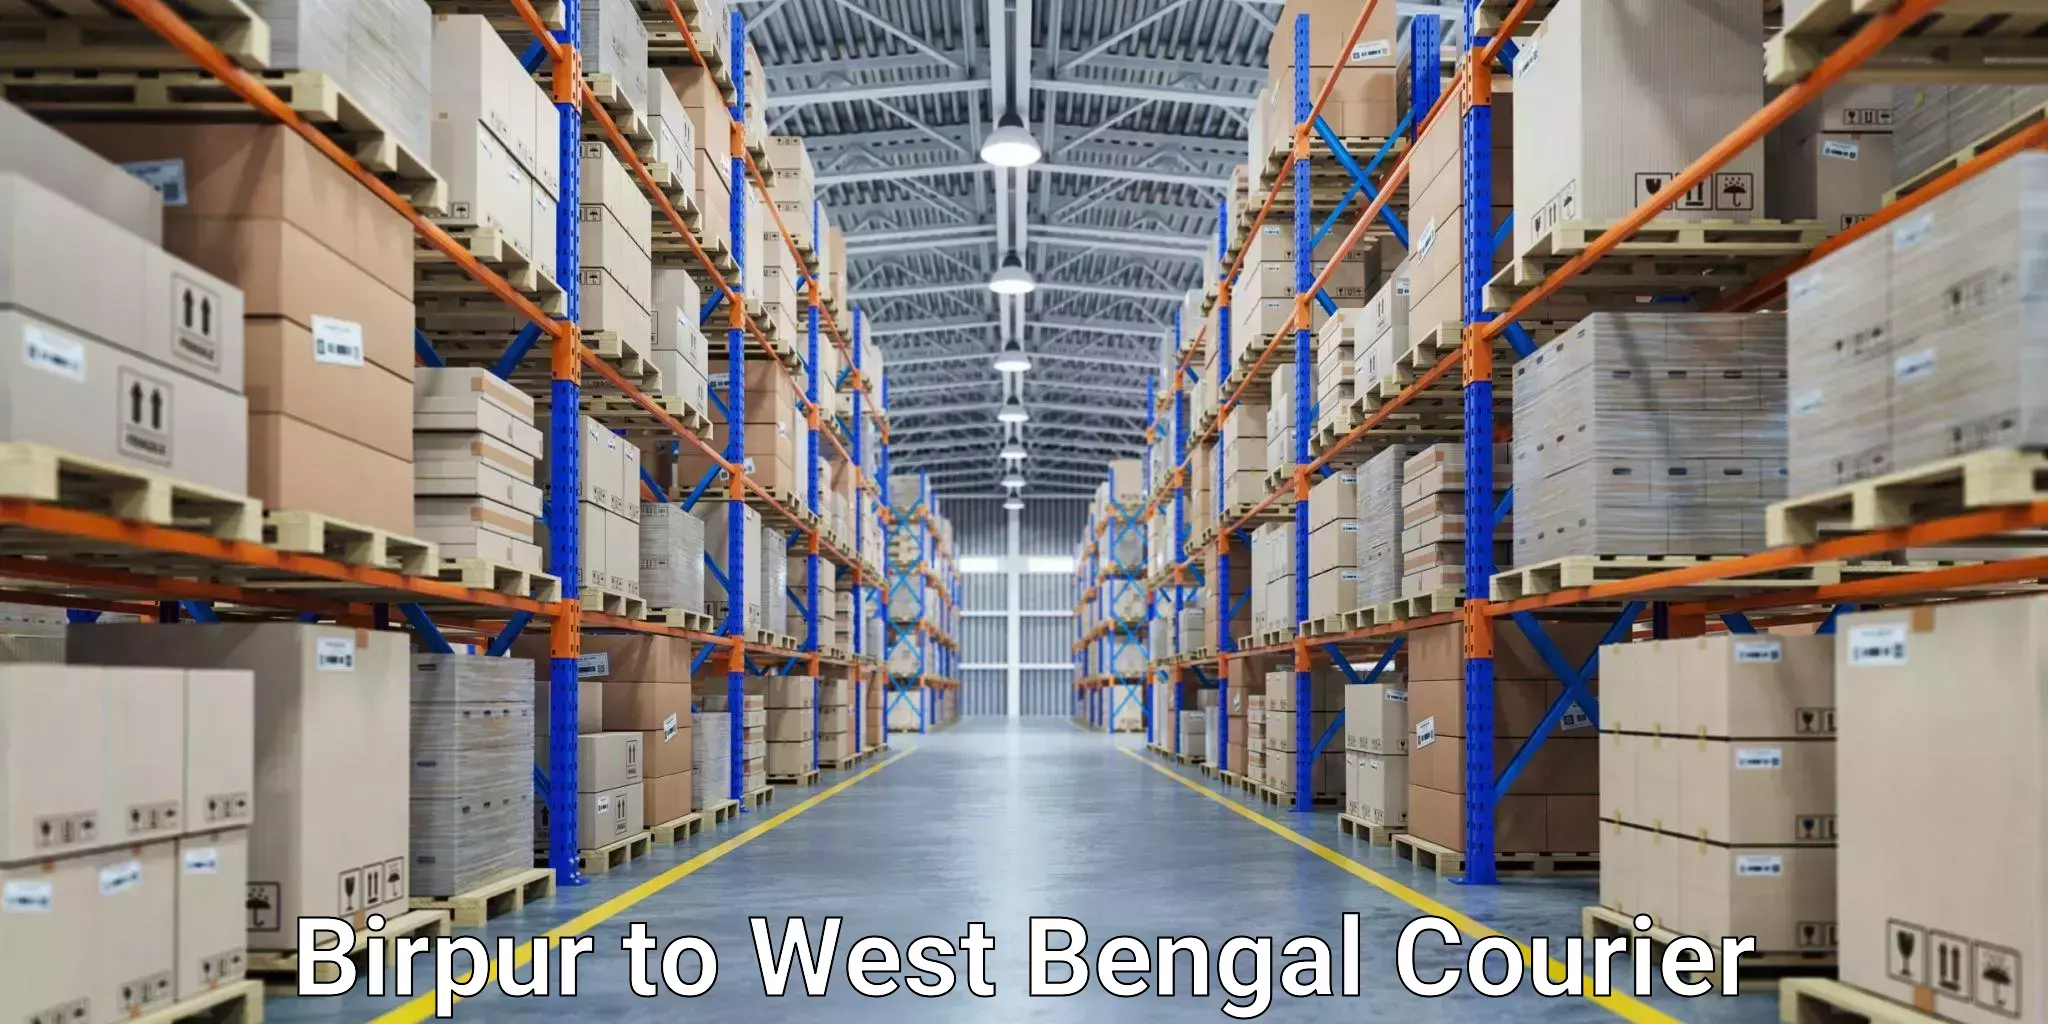 Expedited shipping methods Birpur to West Bengal